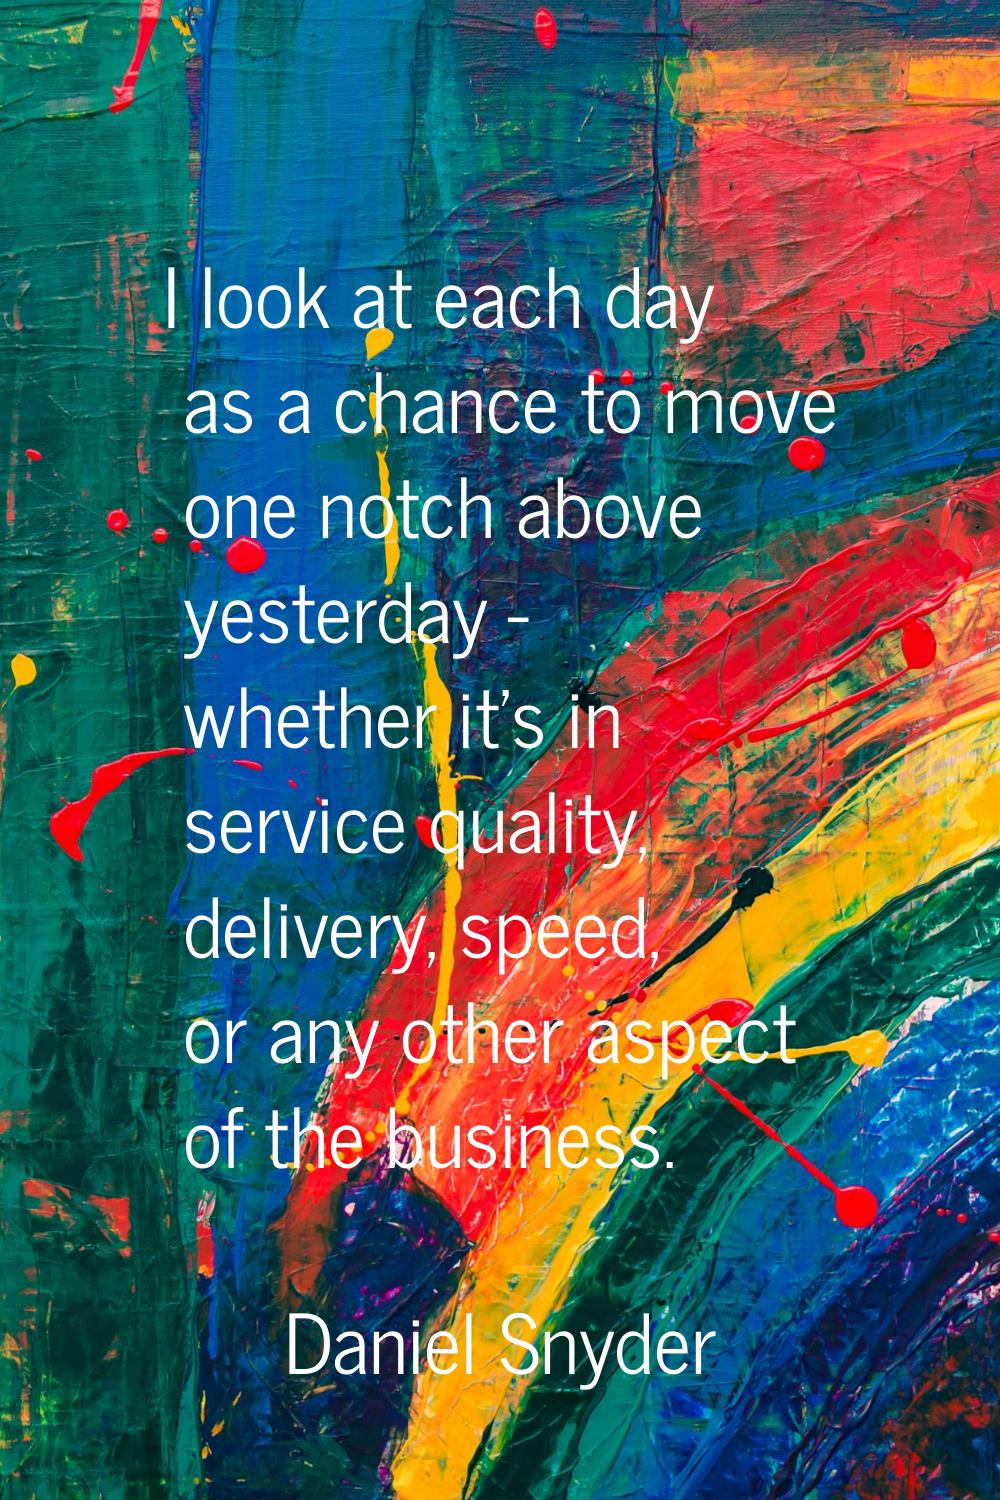 I look at each day as a chance to move one notch above yesterday - whether it's in service quality,